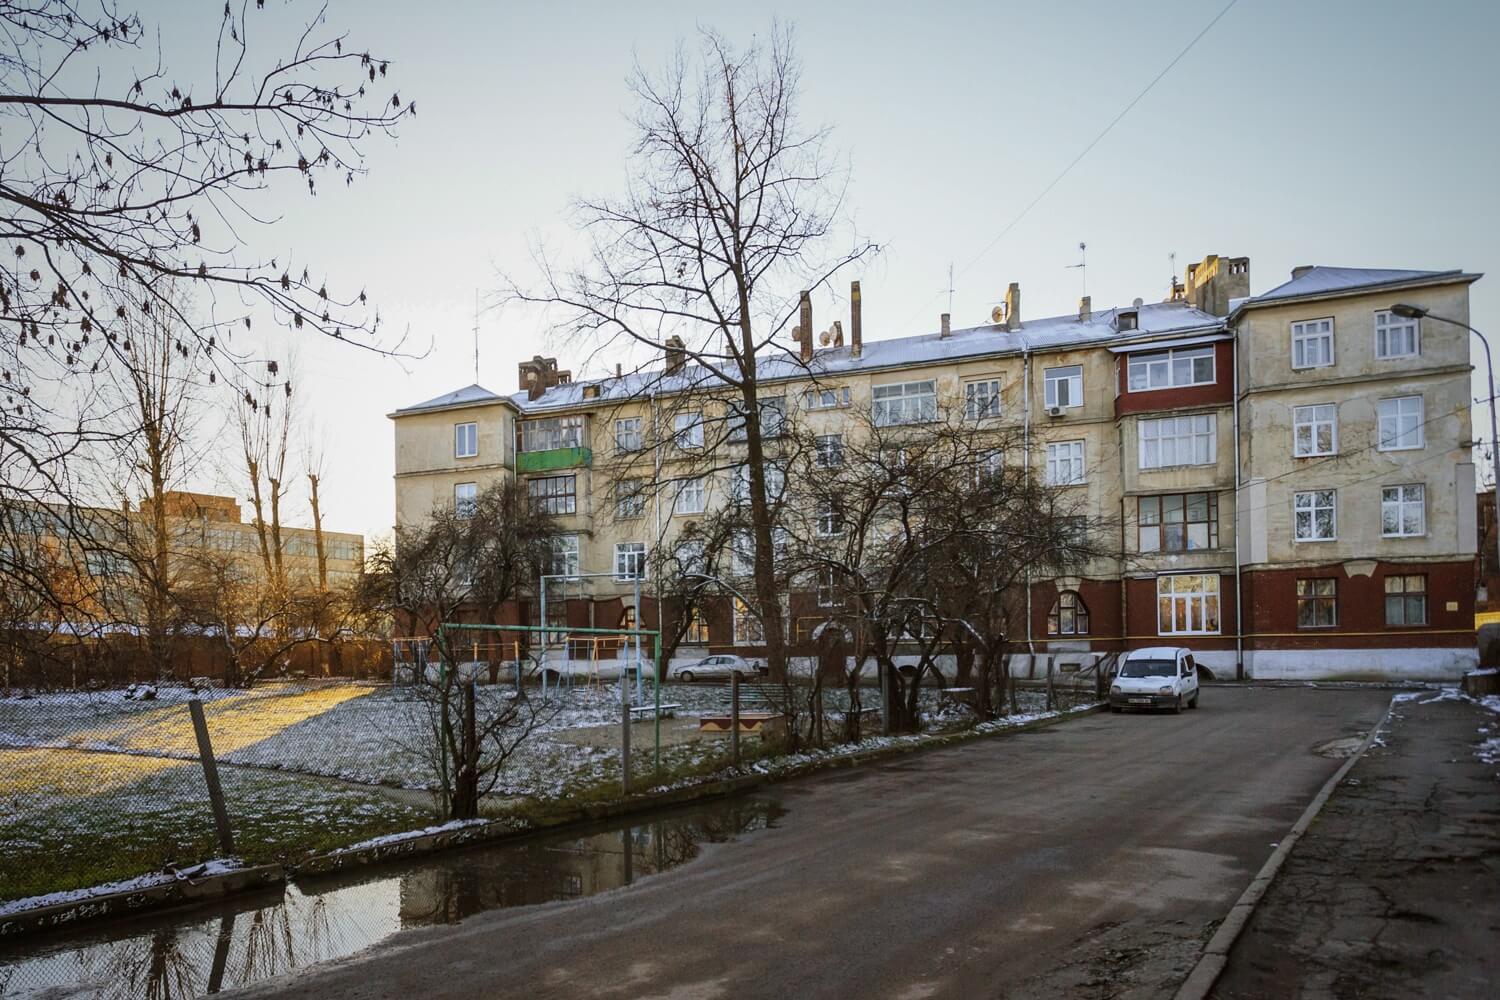 Vul. Promyslova, 31. Building constructed for tram depot workers. The road that leads from vul. promyslova to these buildings/Photo courtesy of Nazarii Parkhomyk, 2015